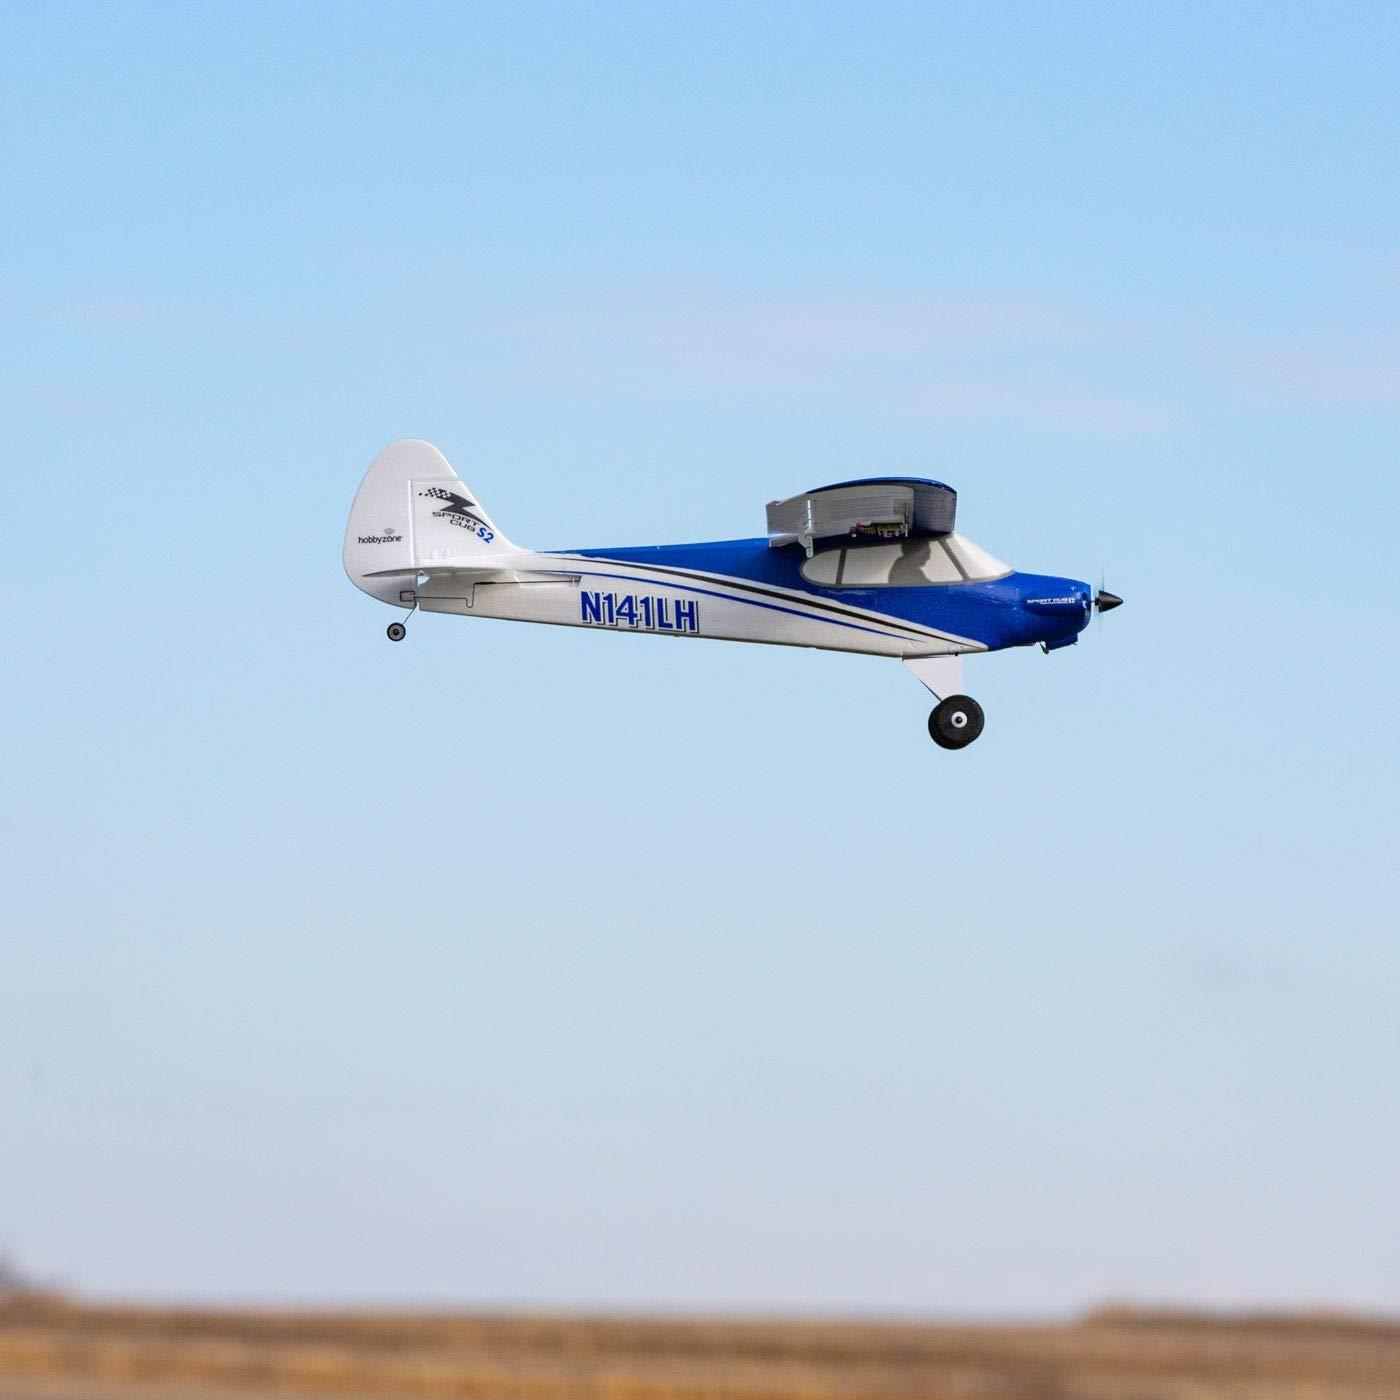 Rc Sport Cub S2: Enhance Your Flying Experience with RC Sport Cub S2's Lightweight Design and Advanced Technology